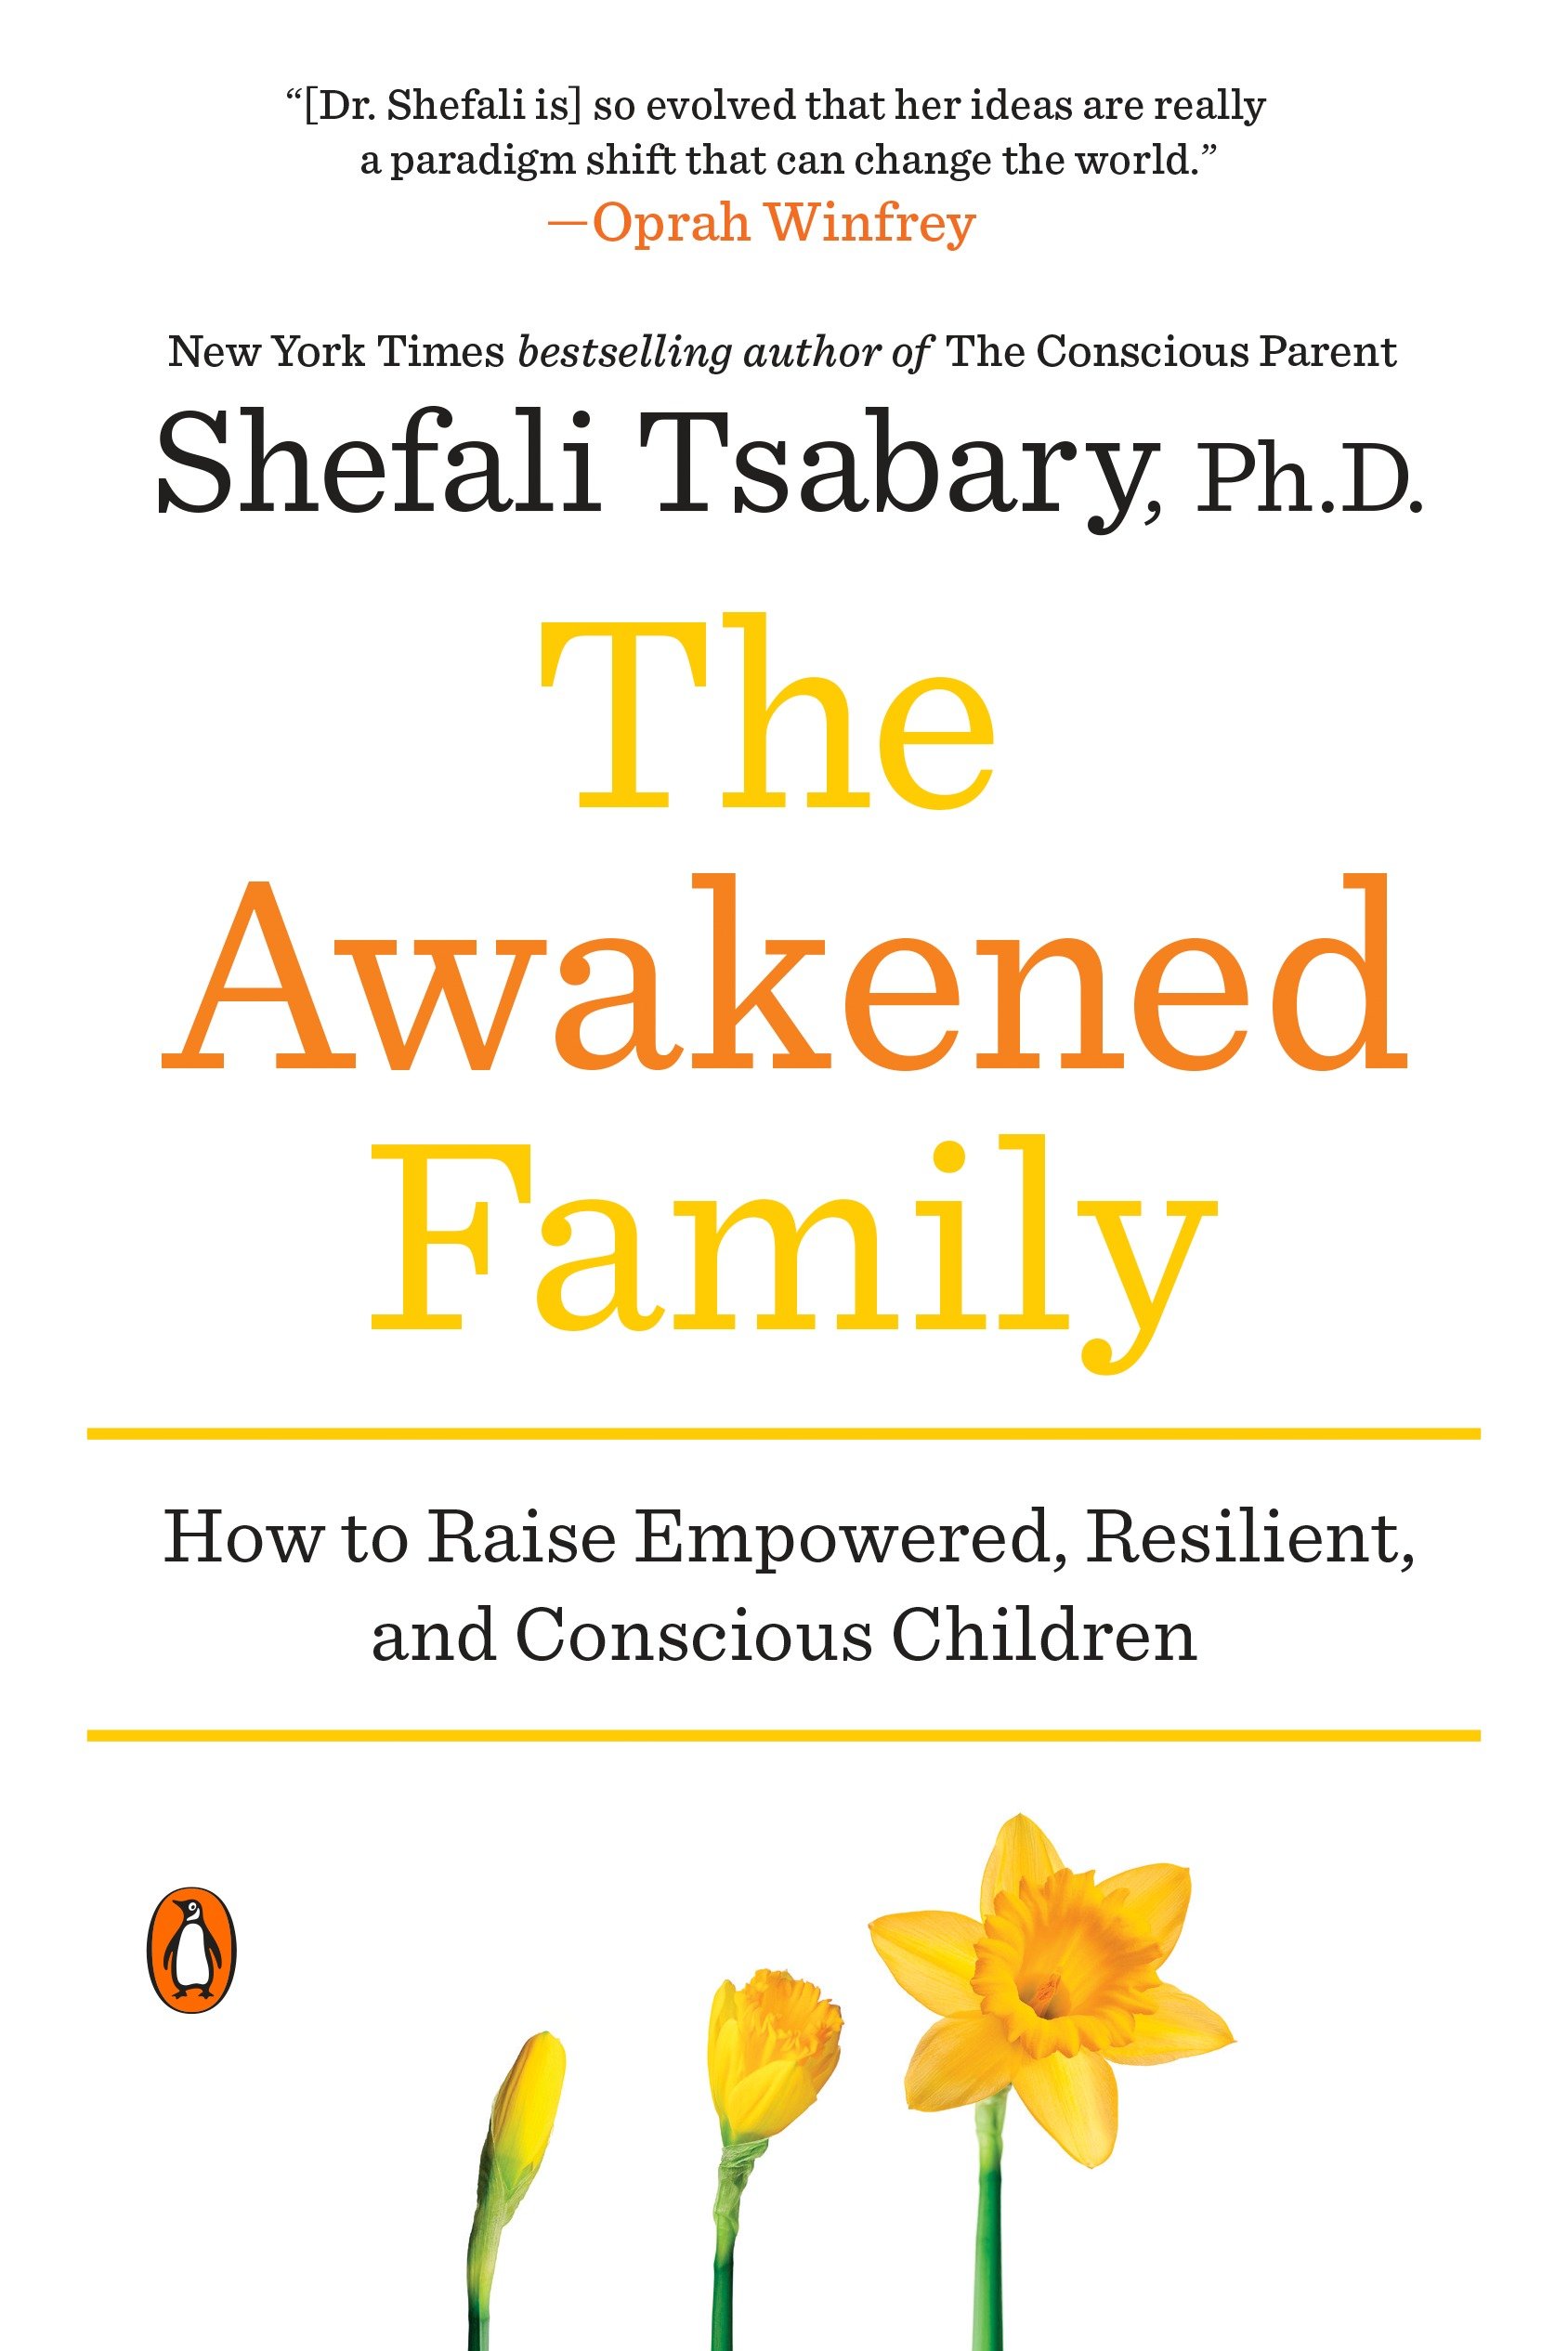 Imagen de portada para The Awakened Family [electronic resource] : How to Raise Empowered, Resilient, and Conscious Children